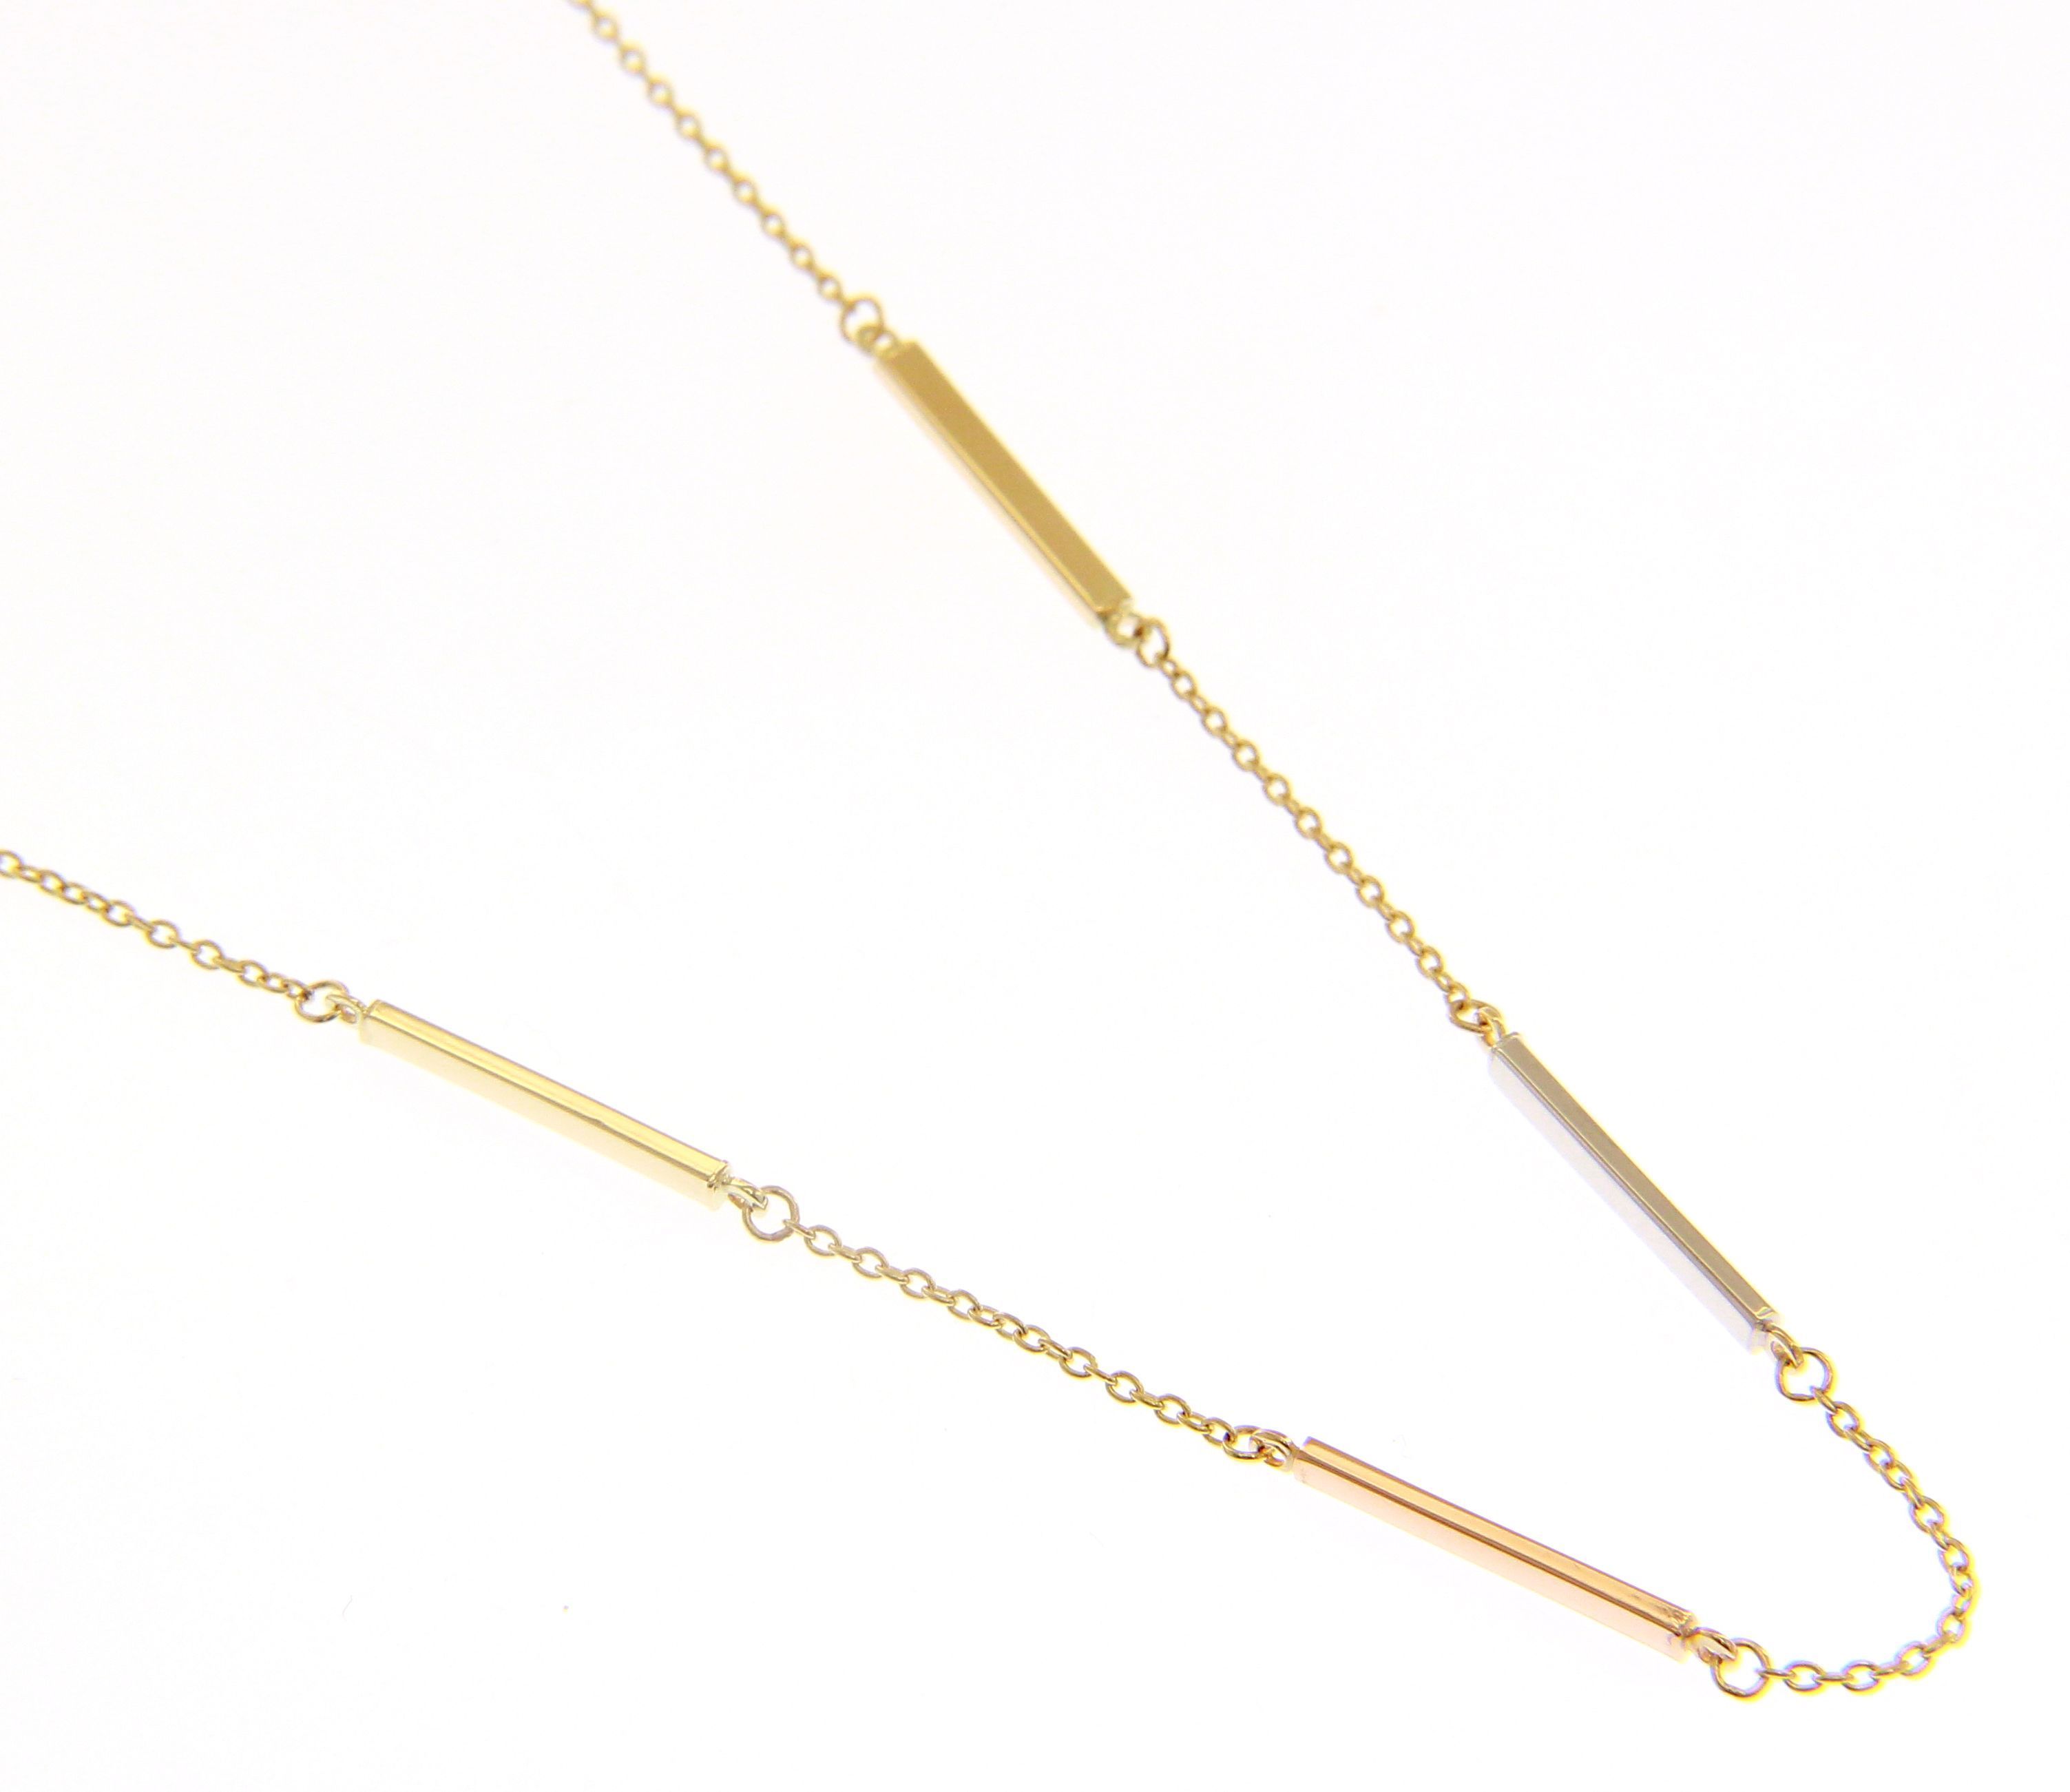 Necklace made of gold, white gold and rose gold k14  (code S209647)